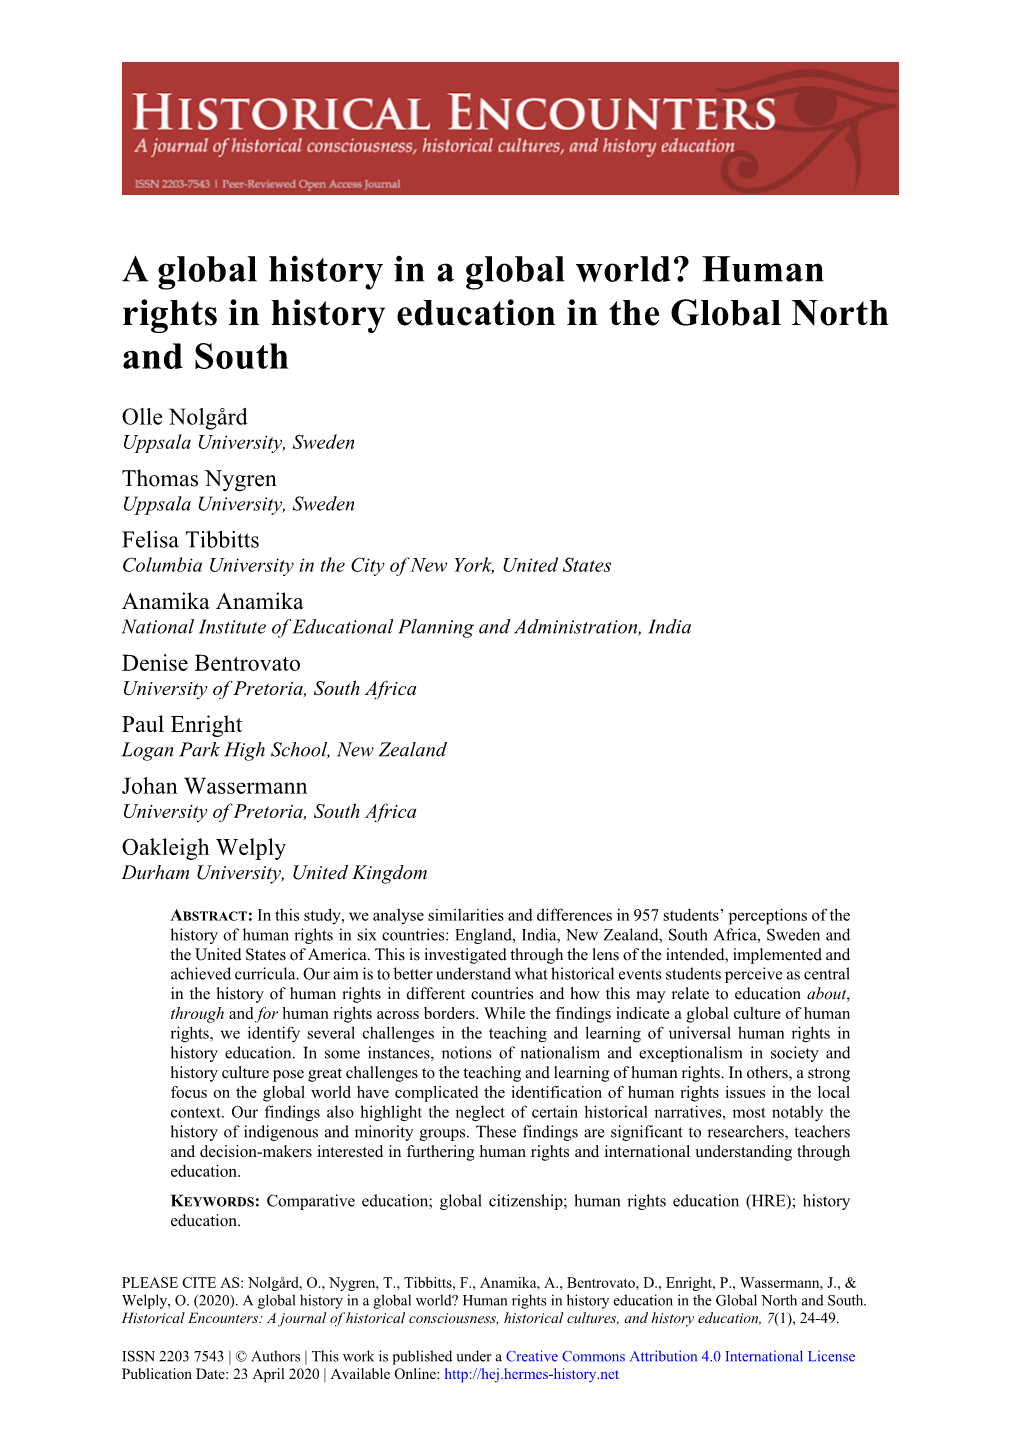 Human Rights in History Education in the Global North and South